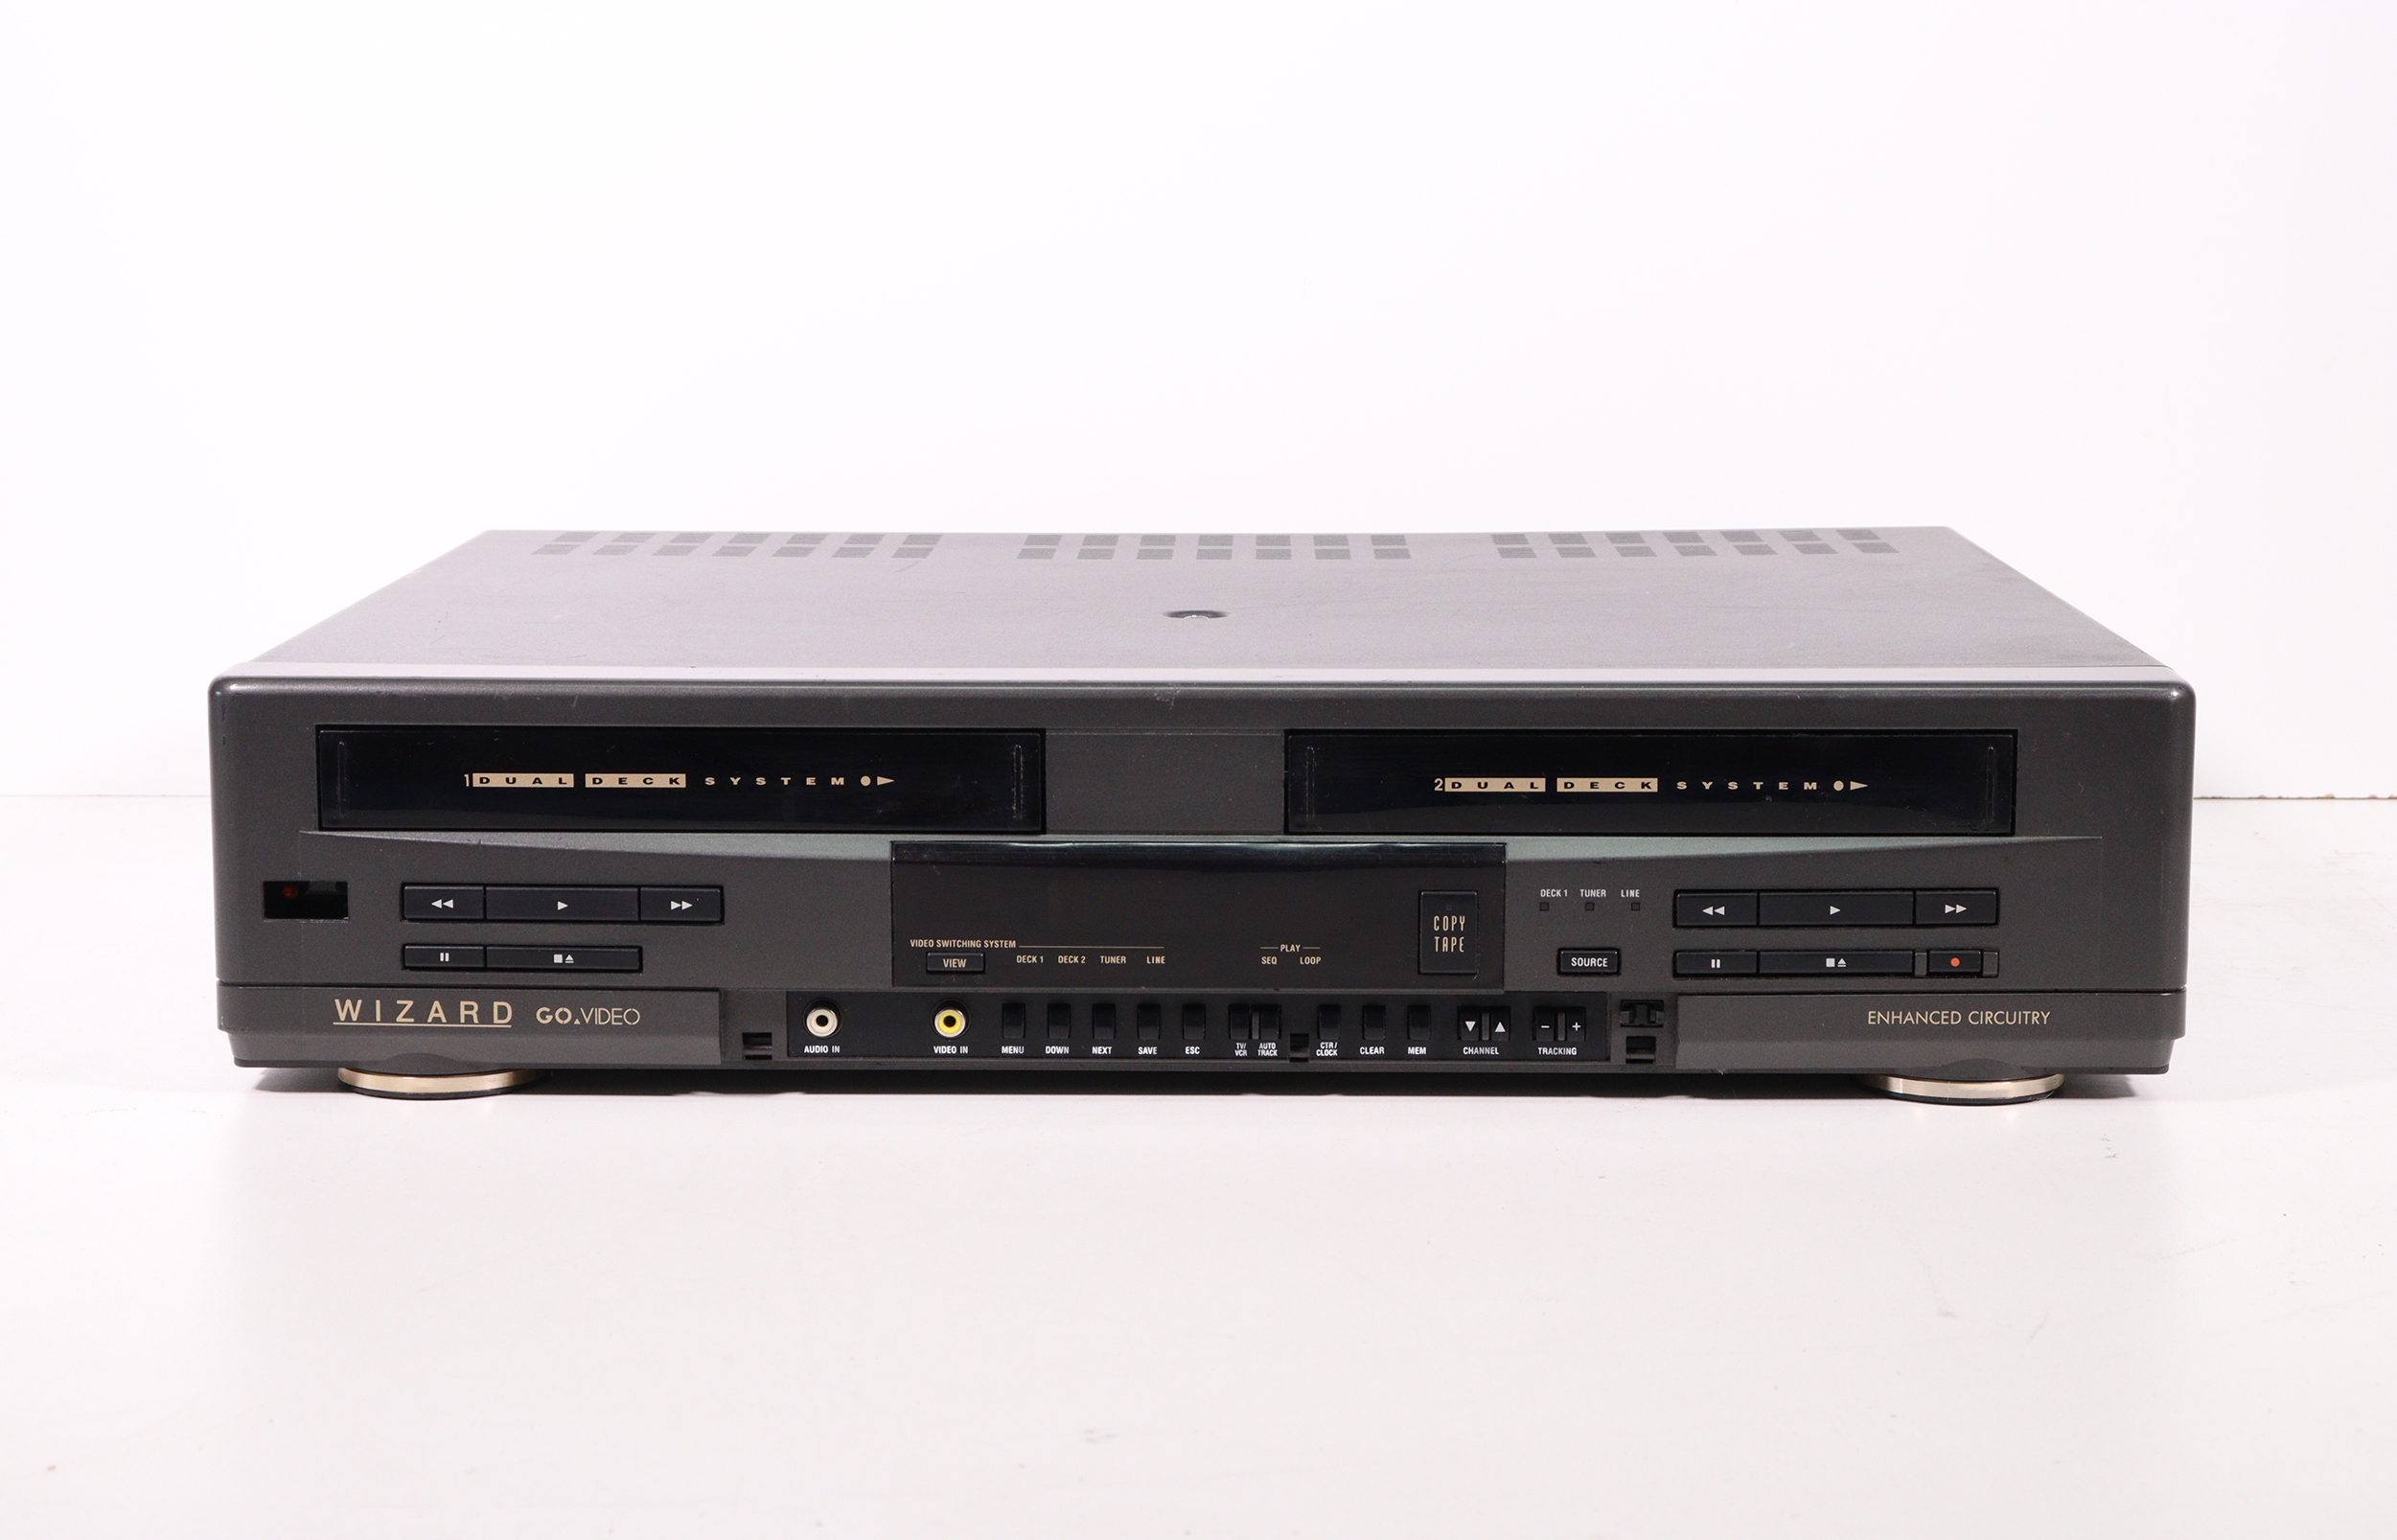 VHS Video Tape Cassette VCR Player Recorder Fully Serviced 1 YEAR WARRANTY